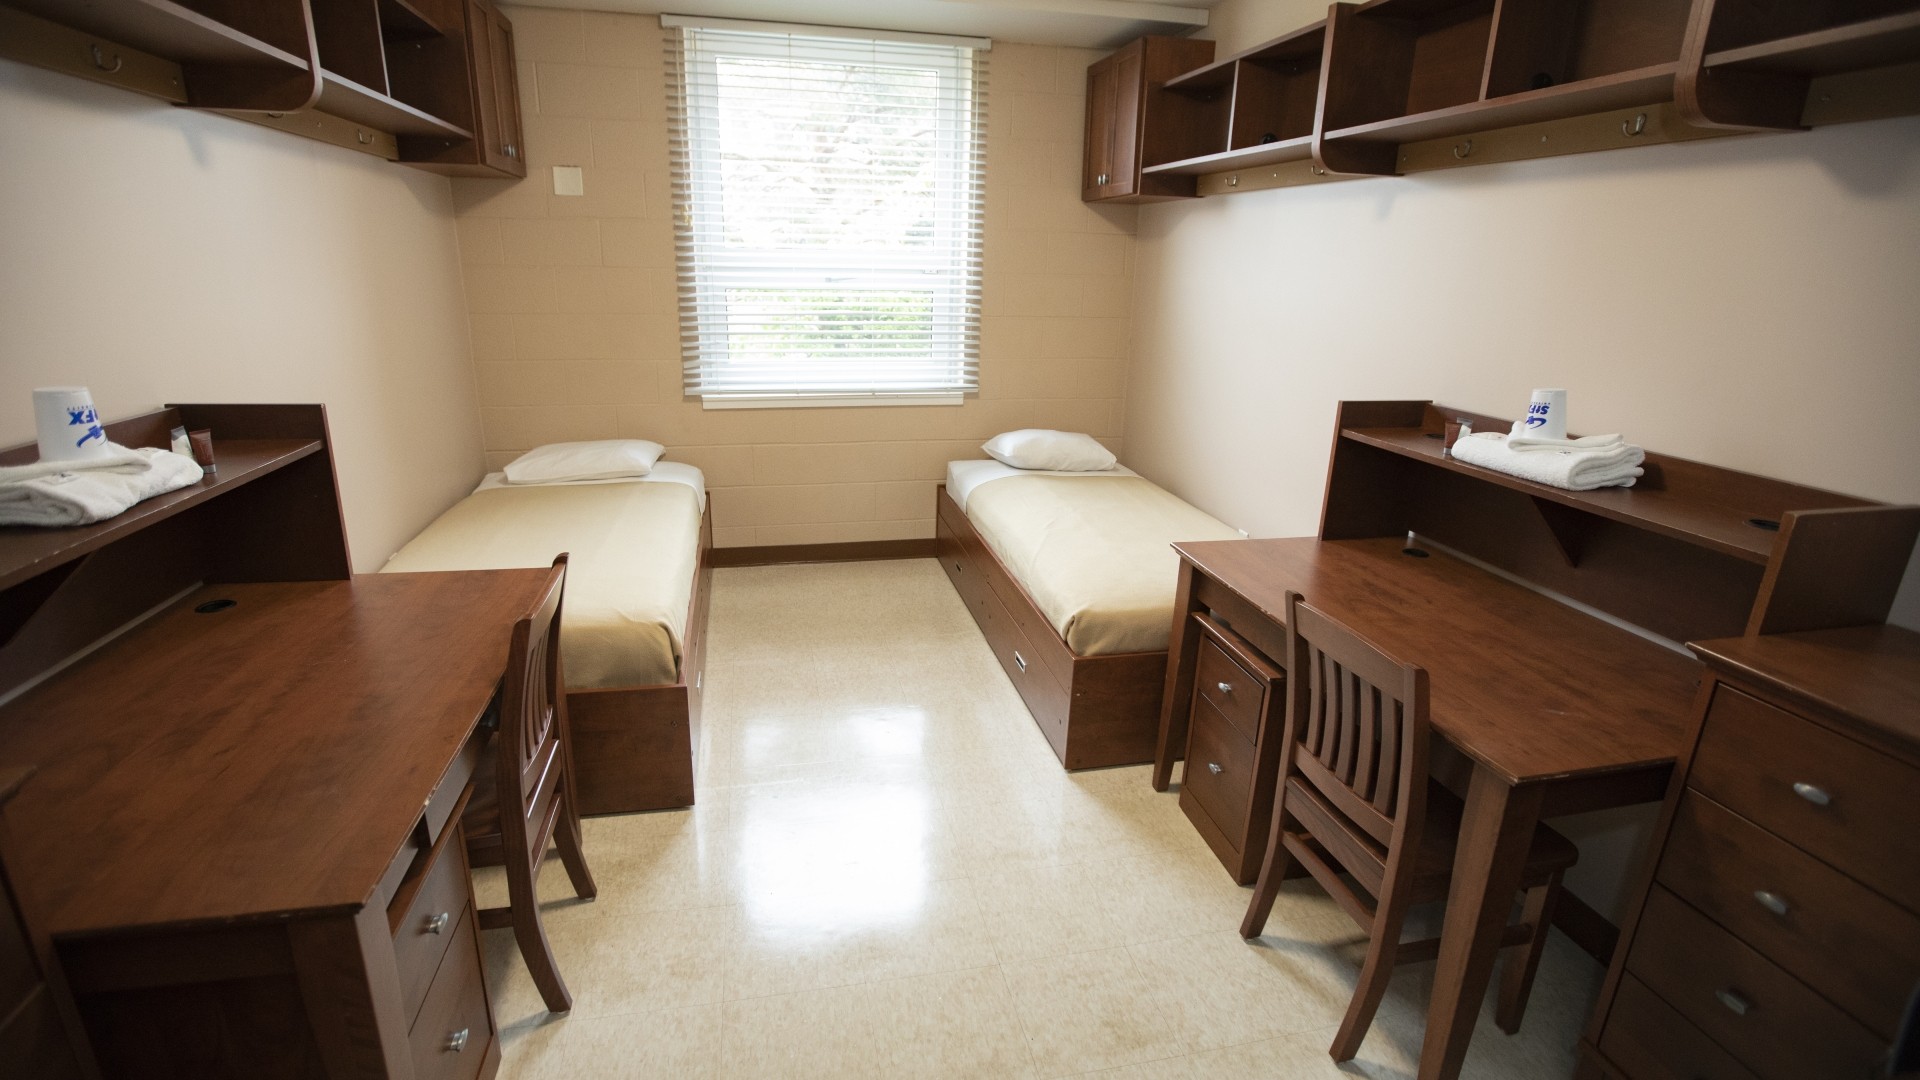 MacIsaac Hall double room with two beds, a window in between and two desks.